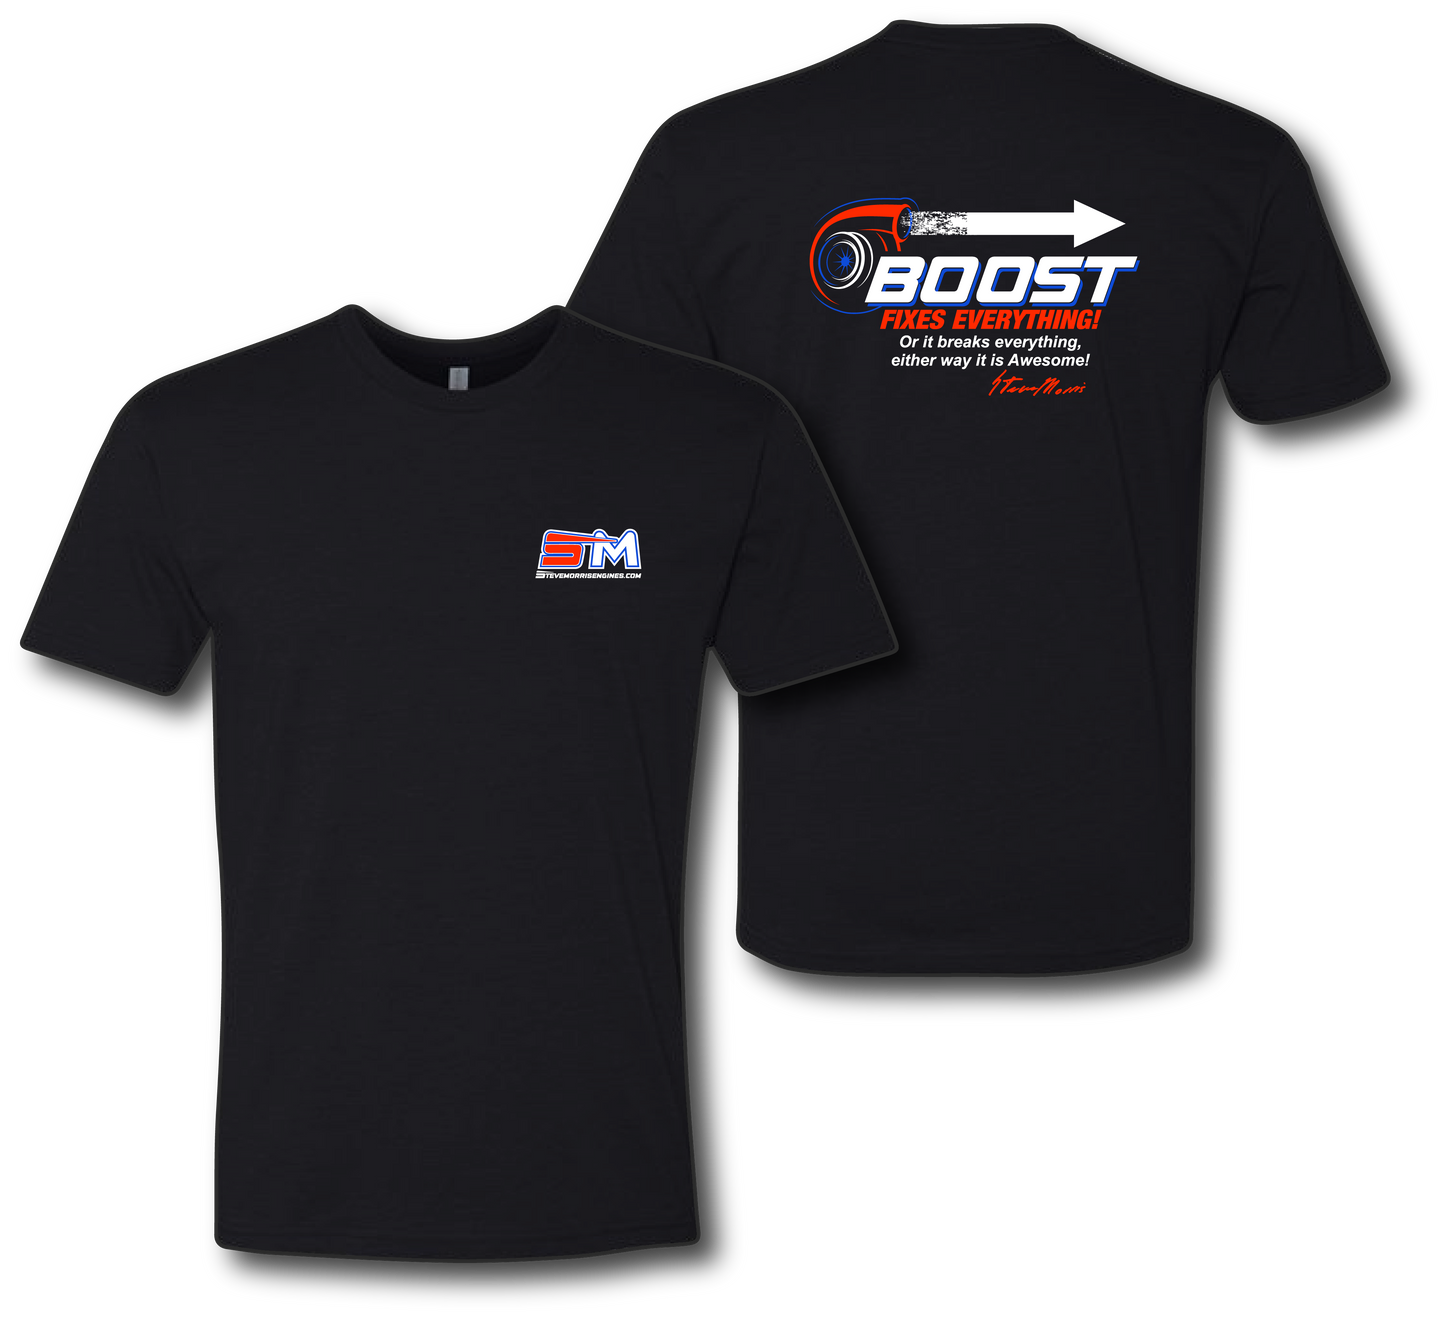 Boost Fixes Everything Shirt